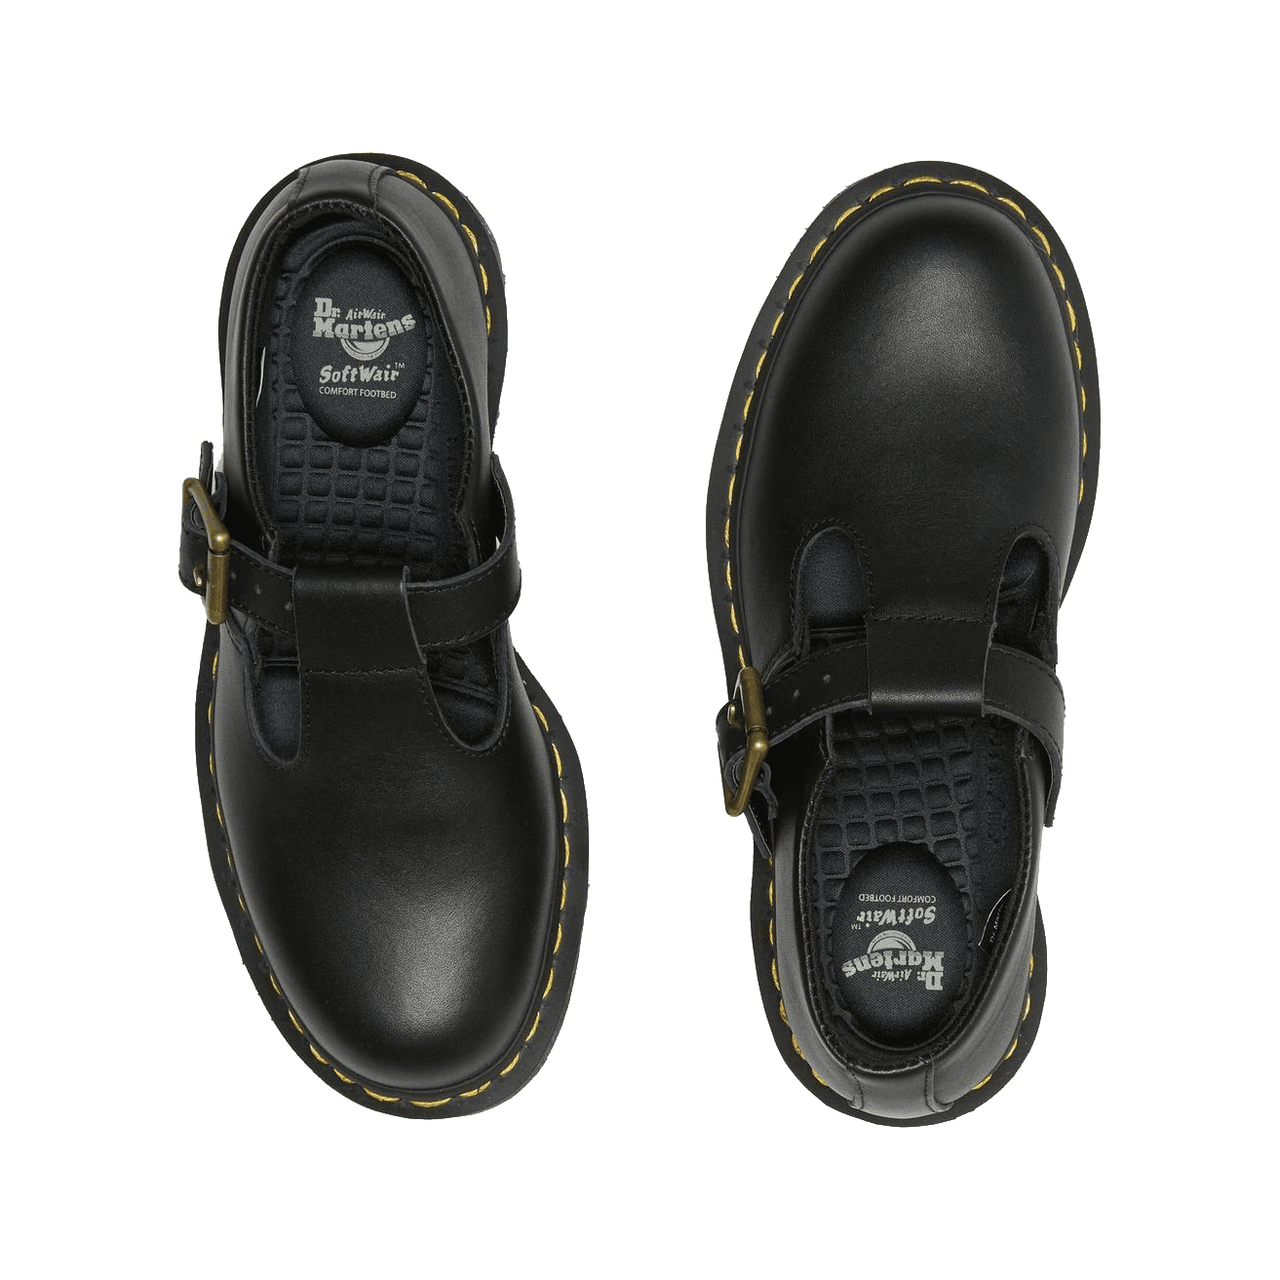 Dr. Martens Slip Resistant Polley Mary Janes